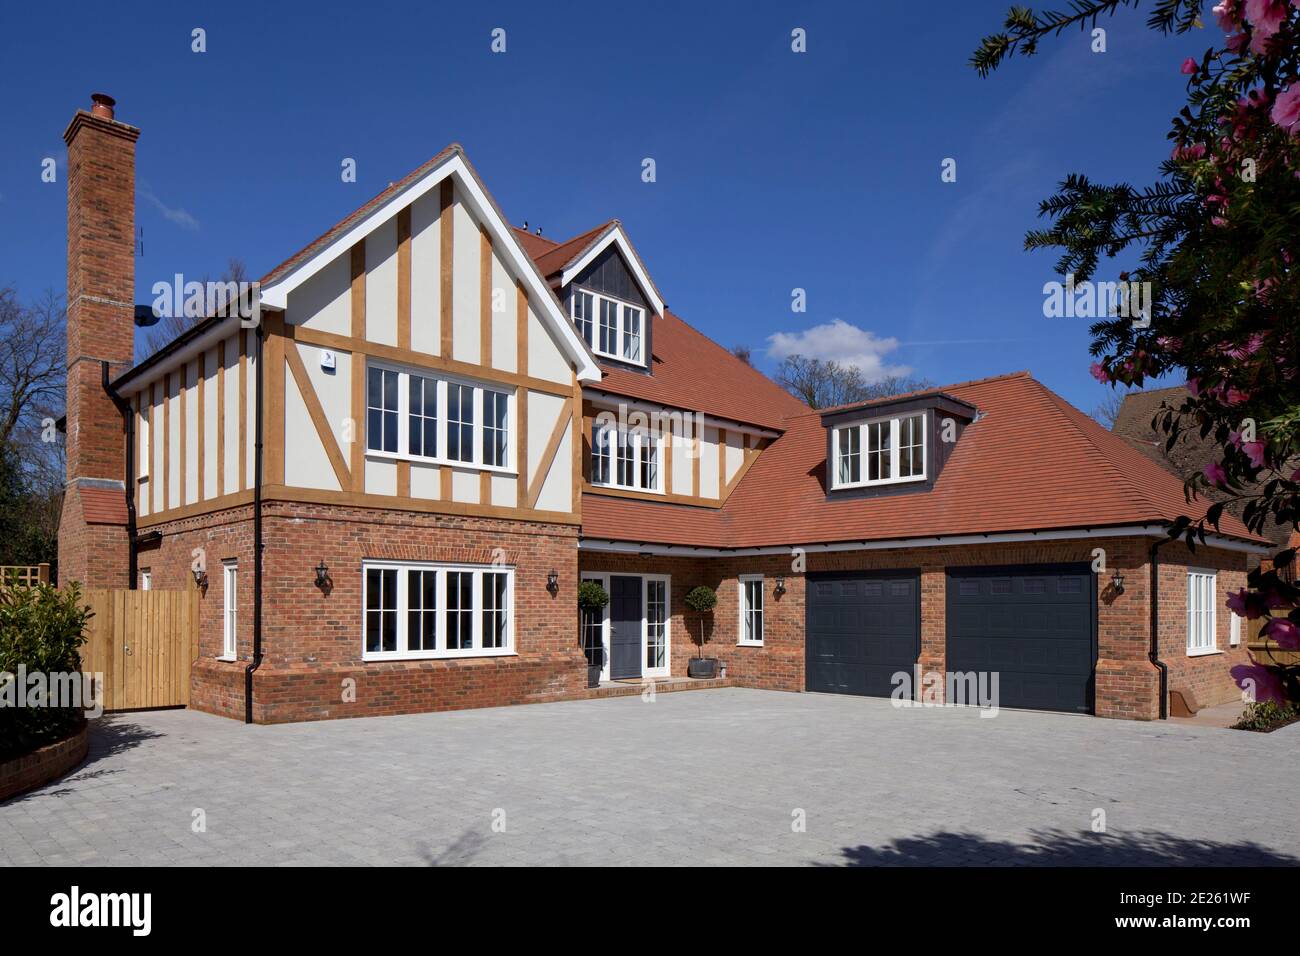 Large brick and timber-framed new build private family house with double garage and grey doors Stock Photo